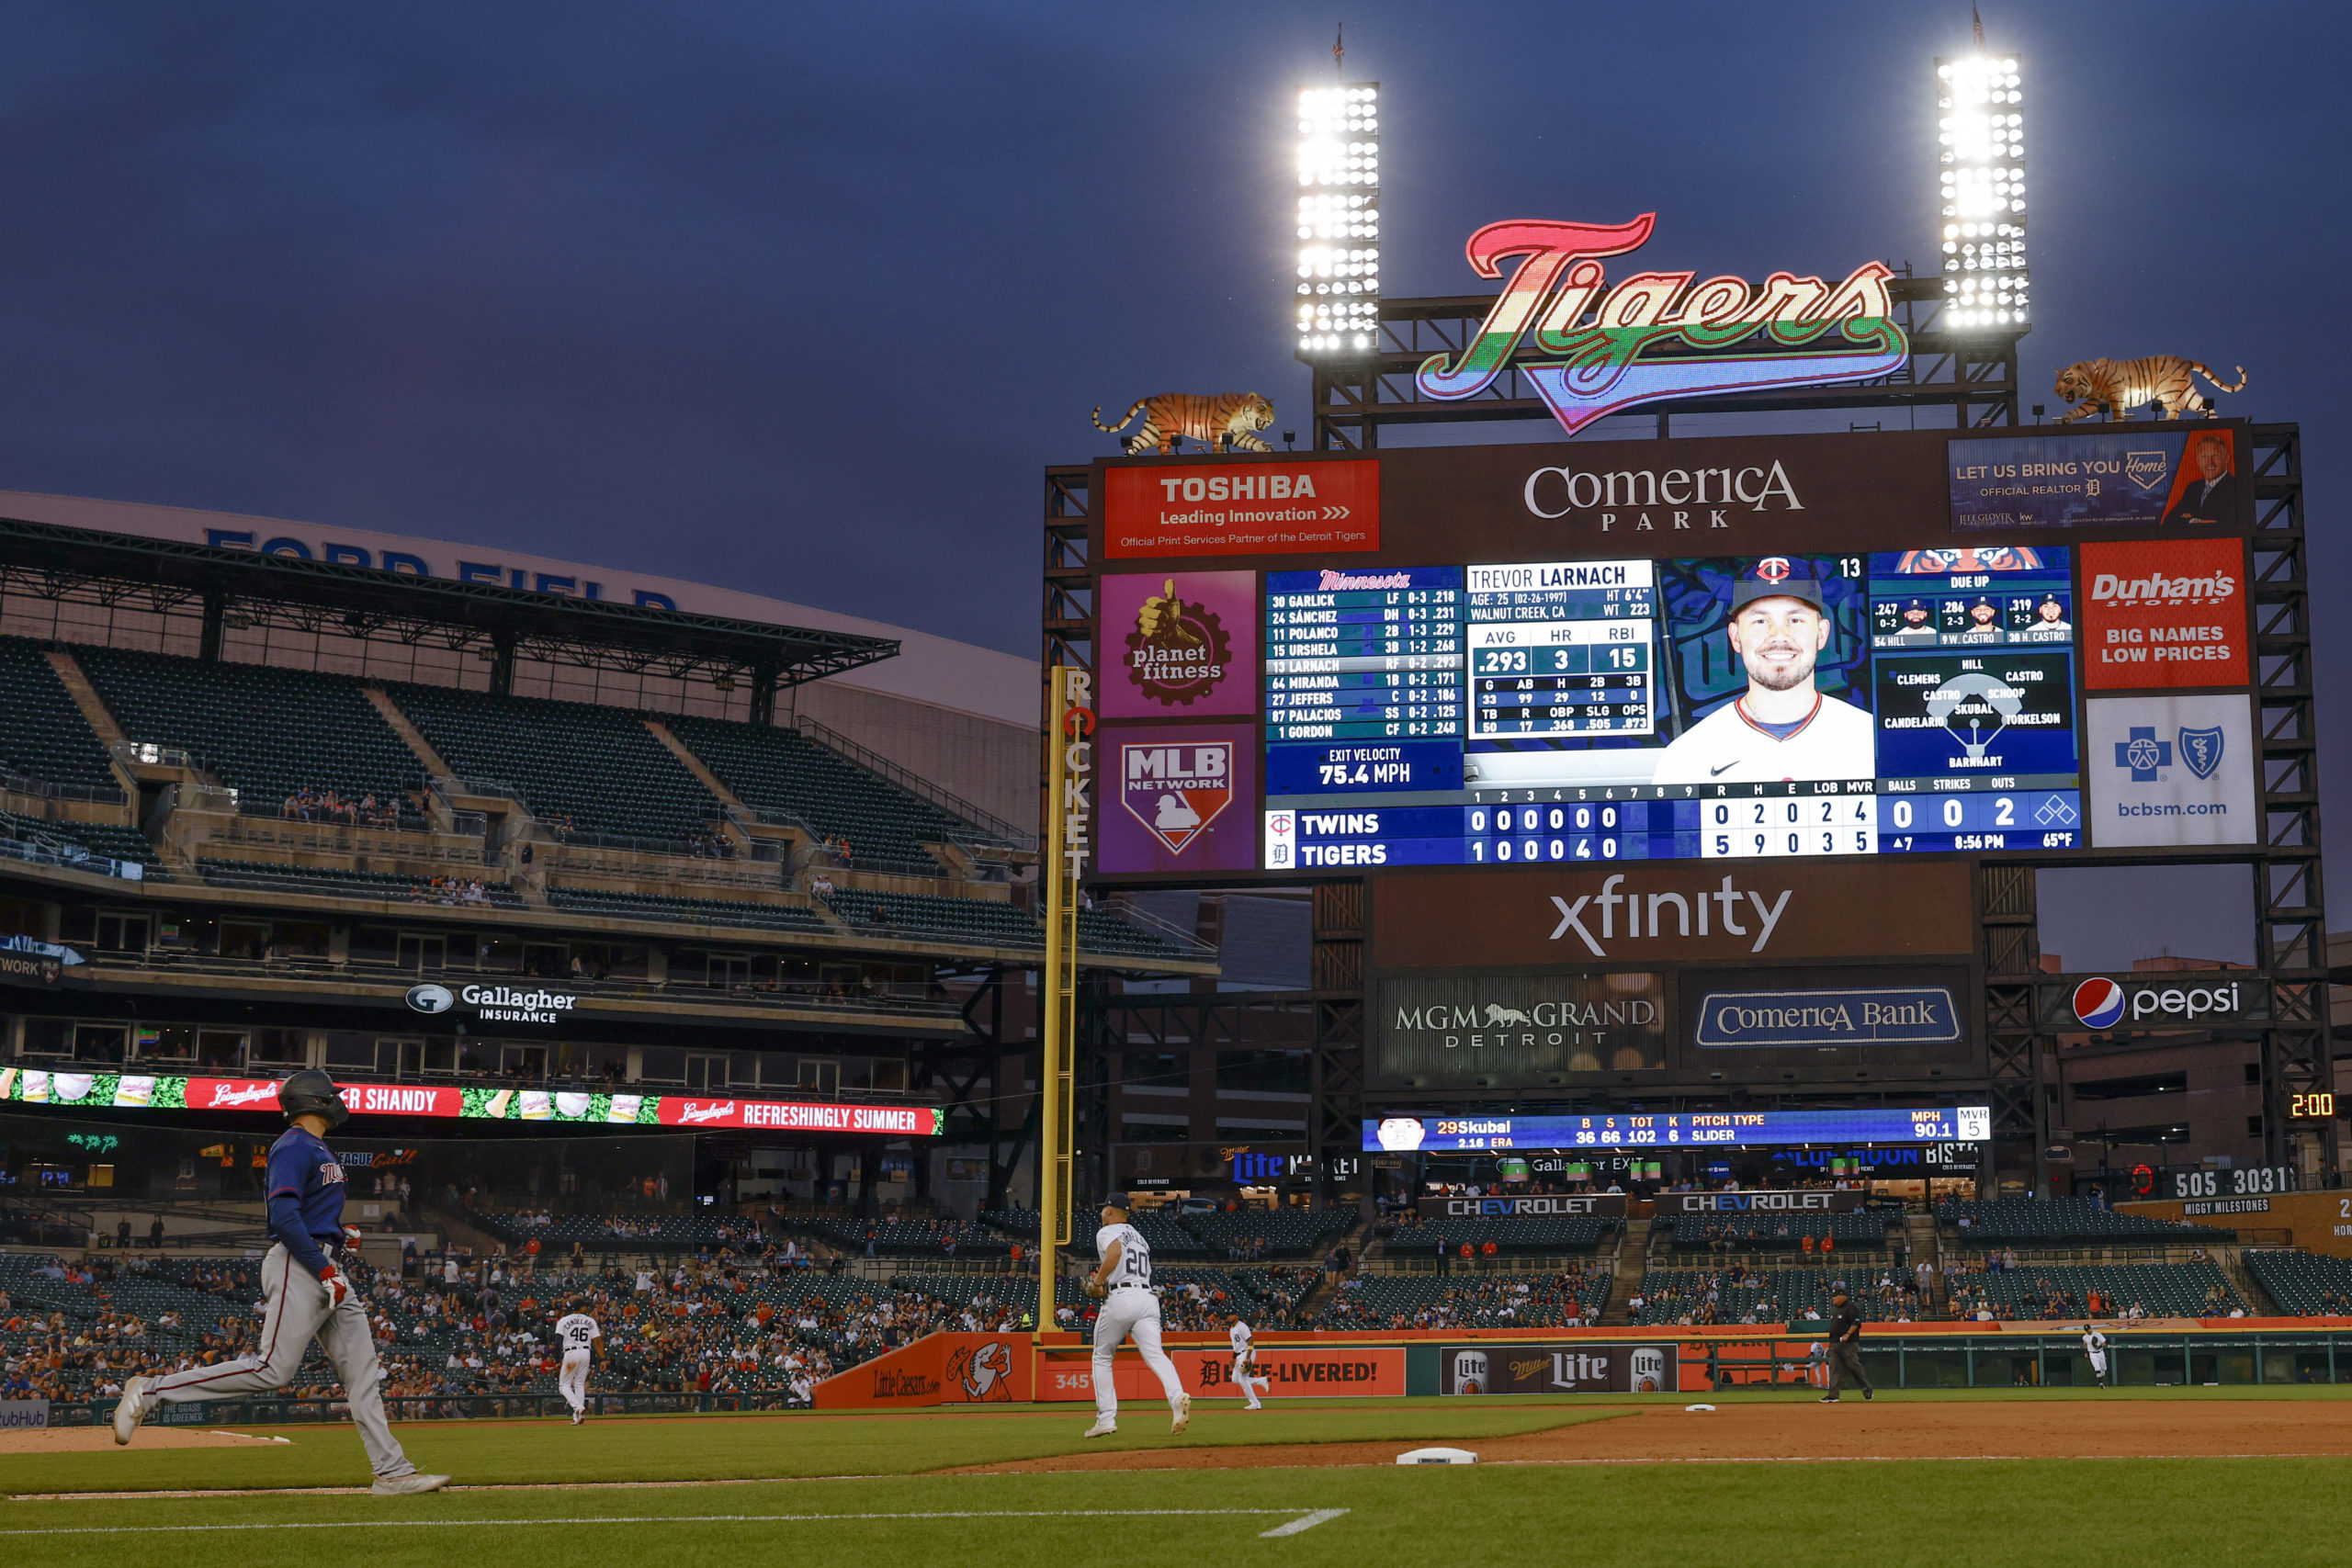 Jun 1, 2022; Detroit, Michigan, USA; The scoreboard displays the Tigers logo in rainbow colors for pride month during the game between the Detroit Tigers and the Minnesota Twins at Comerica Park. Rick Osentoski-USA TODAY Sports